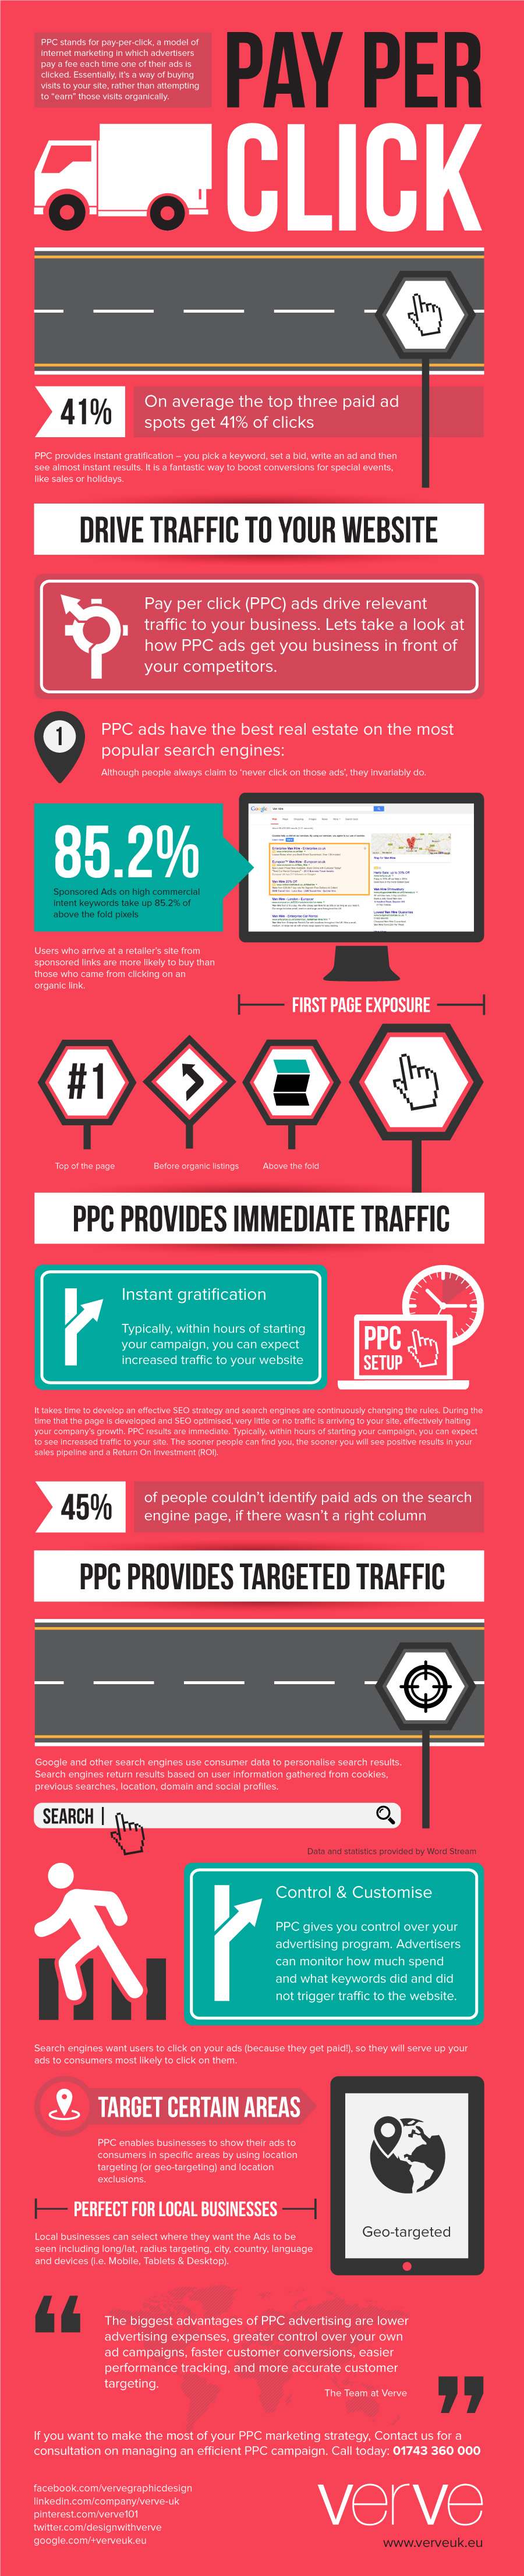 What Is Pay Per CLick (PPC)?